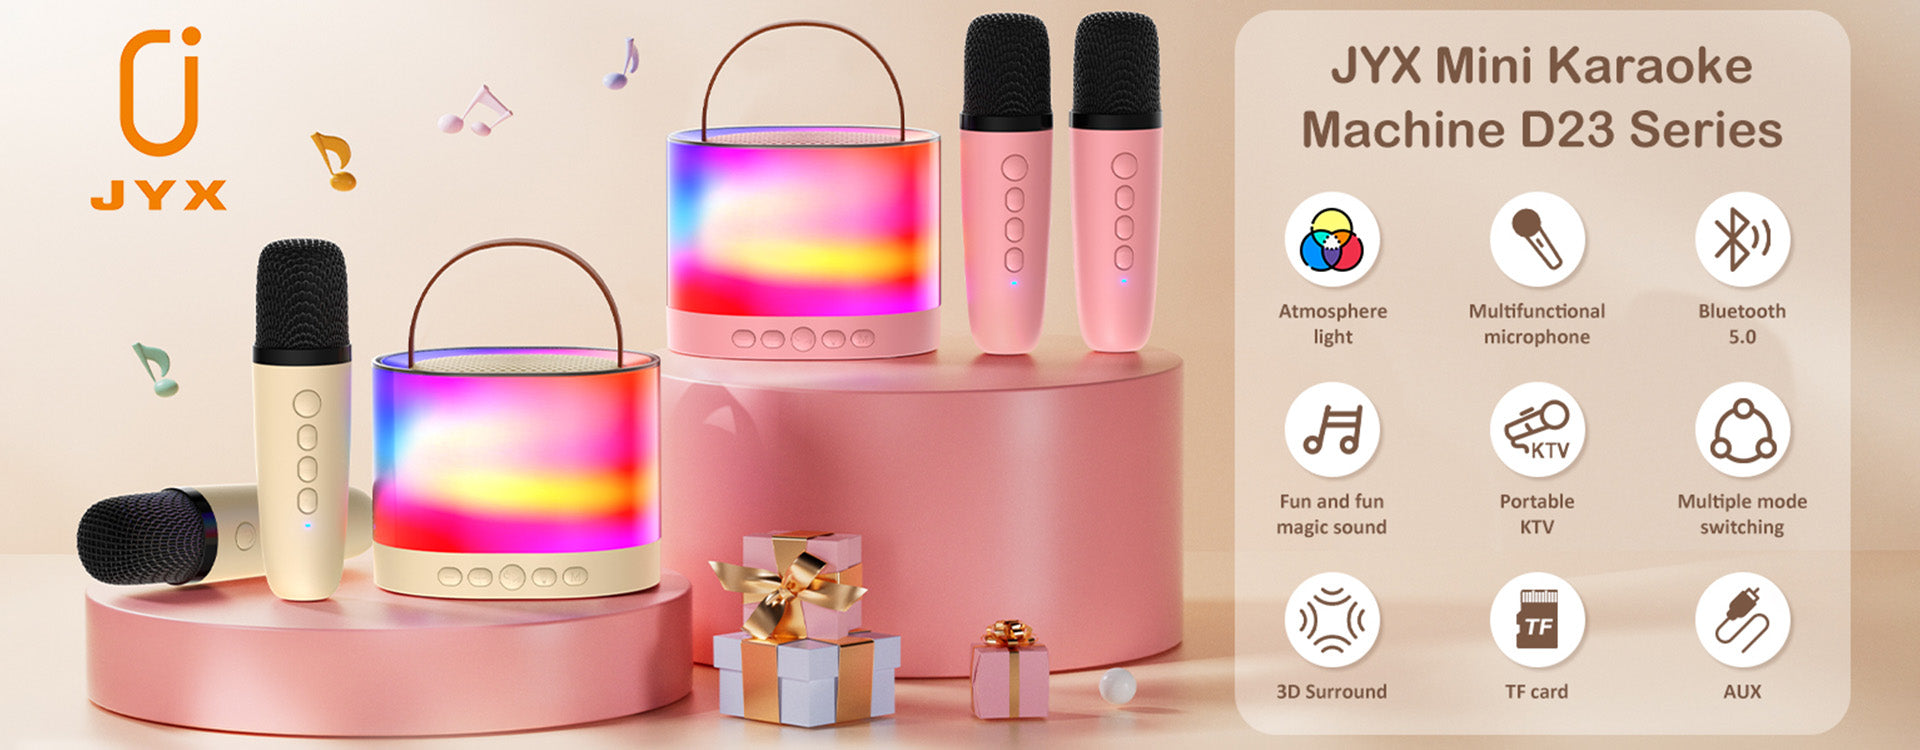 JYX D23 Mini Karaoke for kids with wireless microphones, featuring atmosphere light, Bluetooth 5.0, and portable KTV functionality.